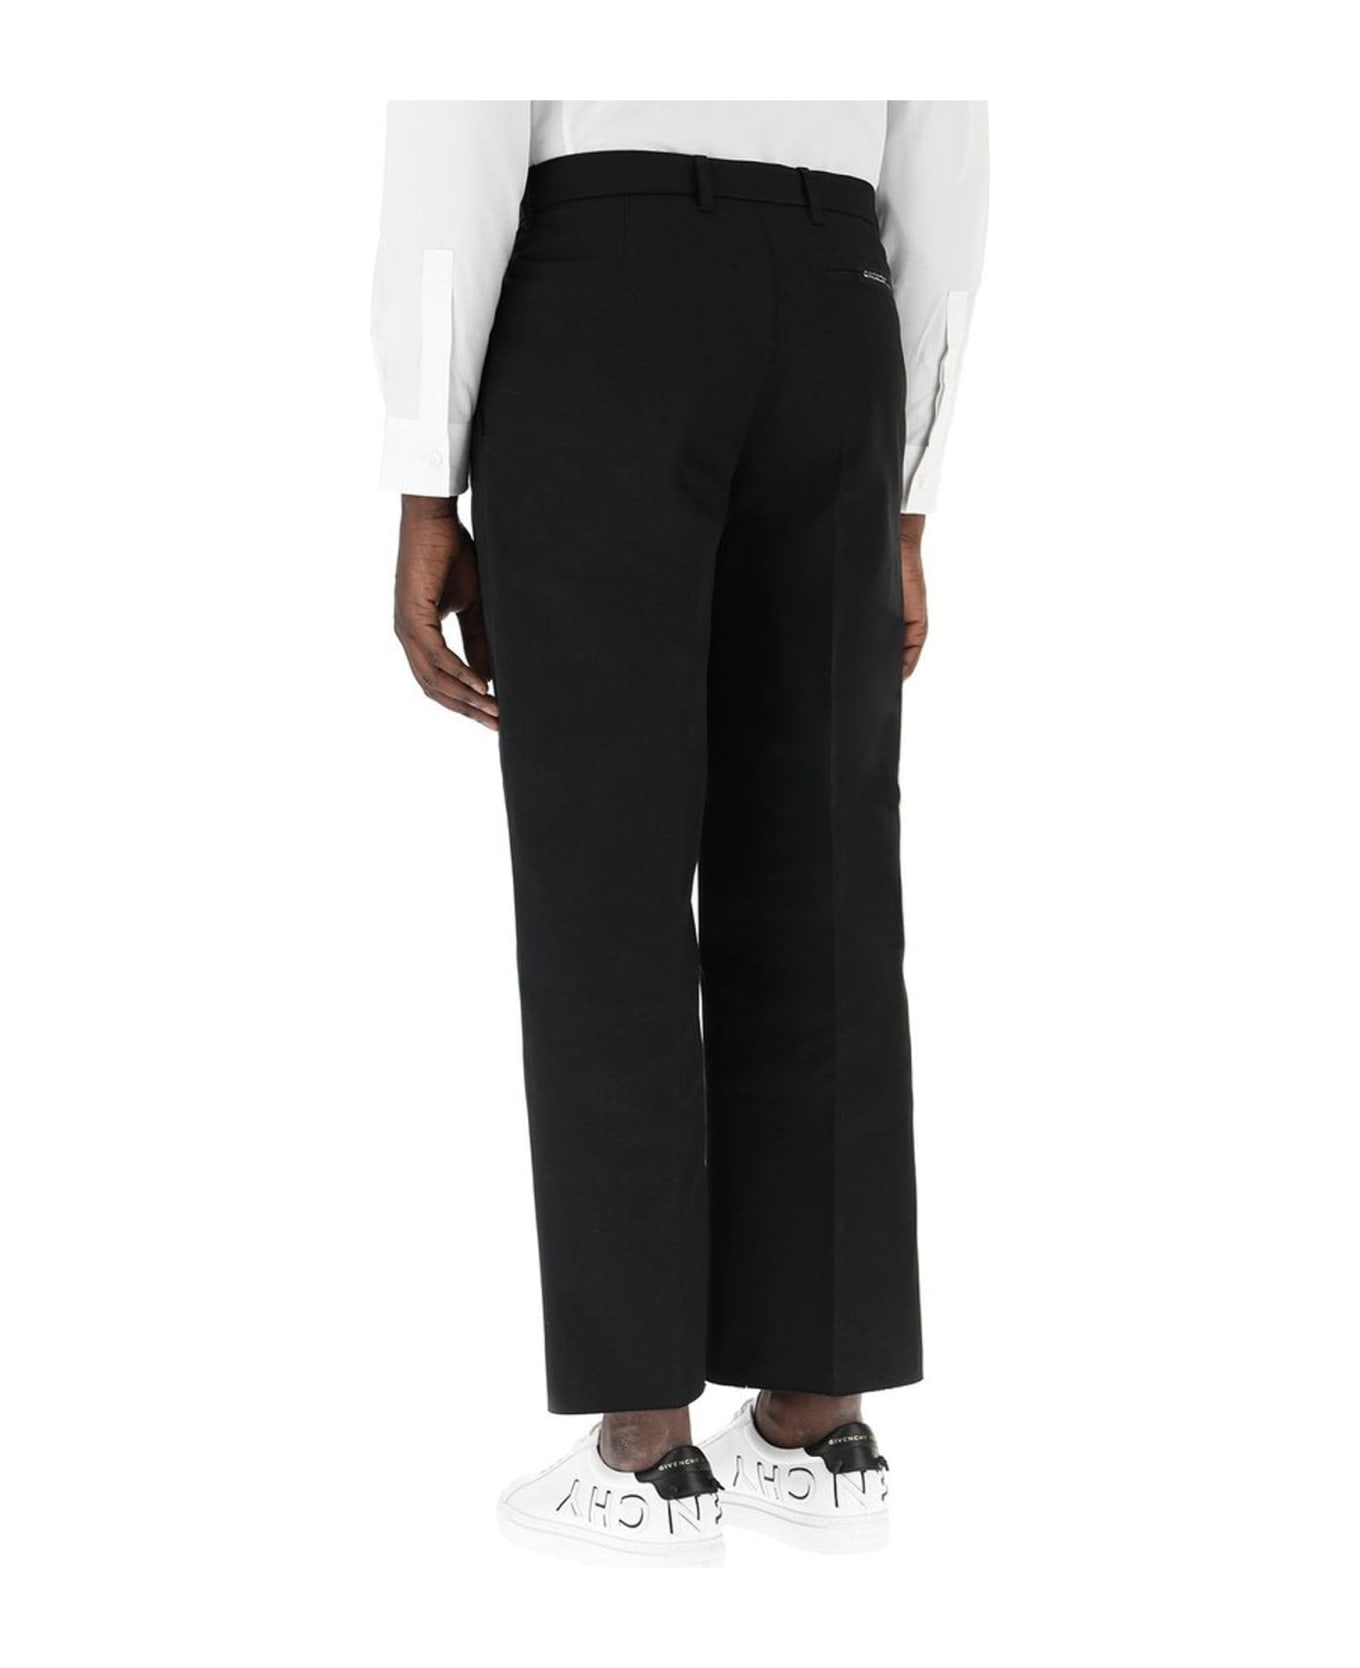 Givenchy Cropped Pants - Black